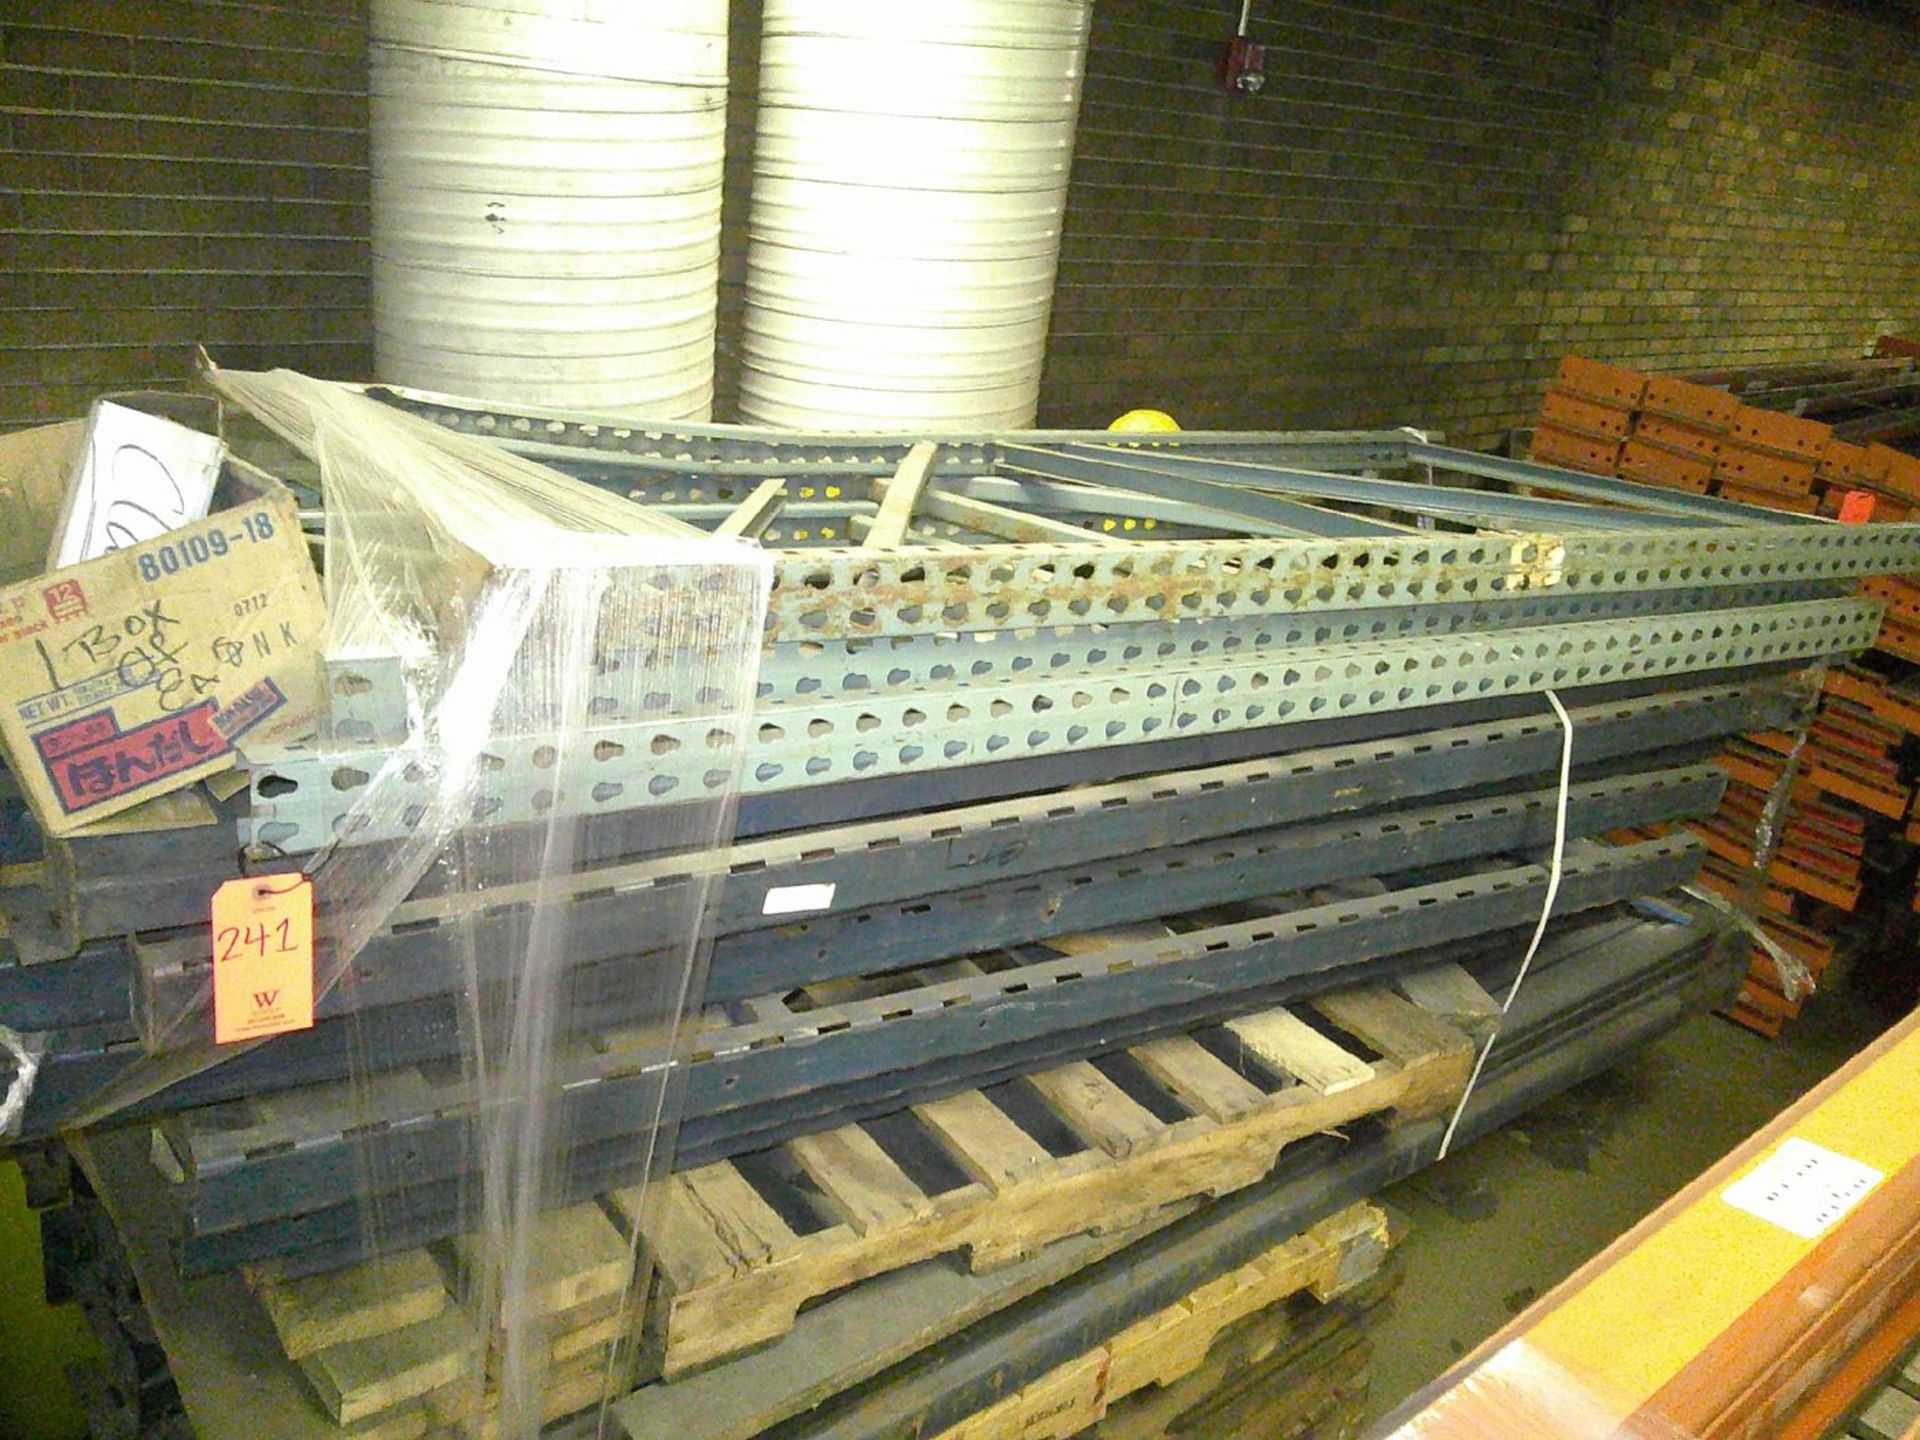 Lot - Pallet of Cross Beams, with Wire Mesh Deck on Pallet; Assorted Uprights; More Cross Beams (3- - Image 2 of 3